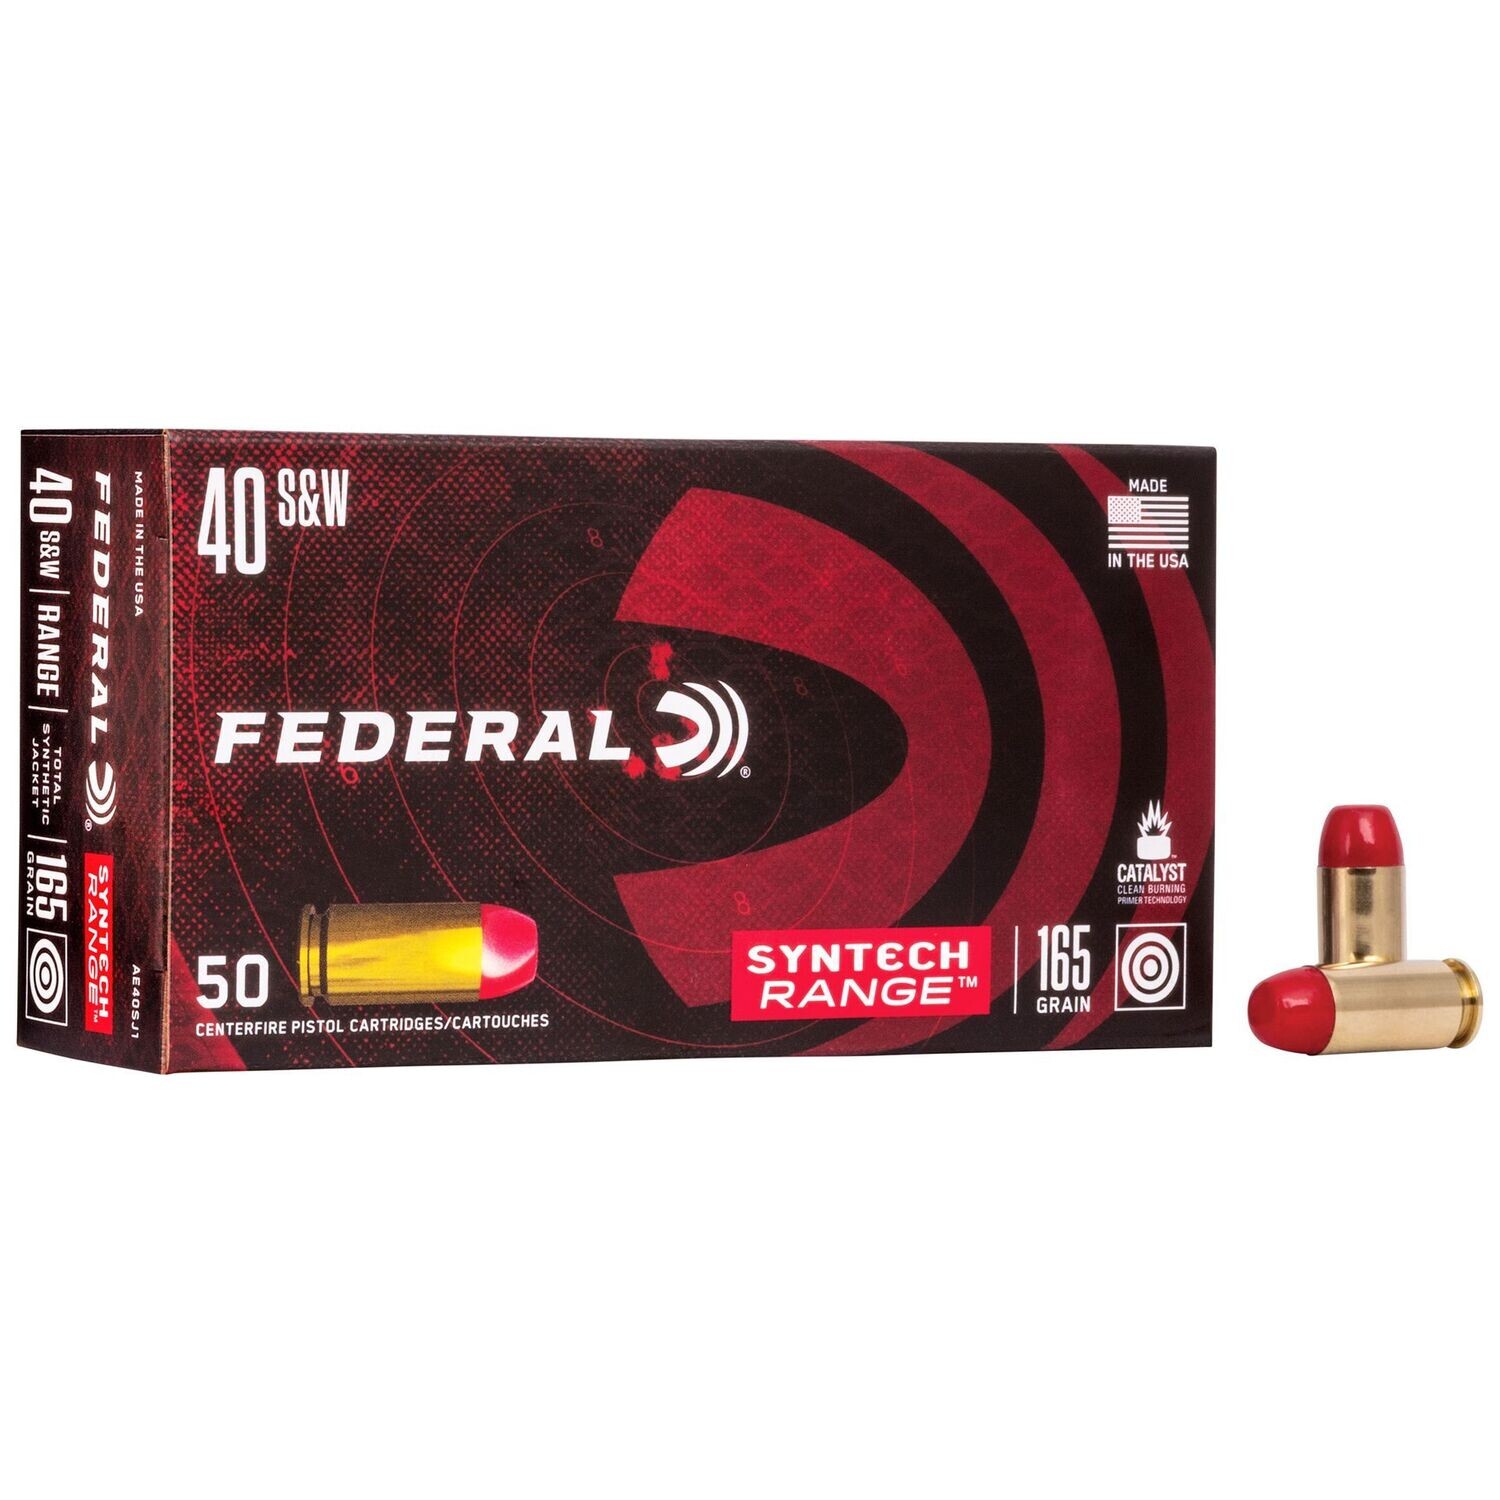 Federal, Syntech Action Pistol, 40 S&W, 165 Grain, Total Synthetic Jacket, 50 Round Box